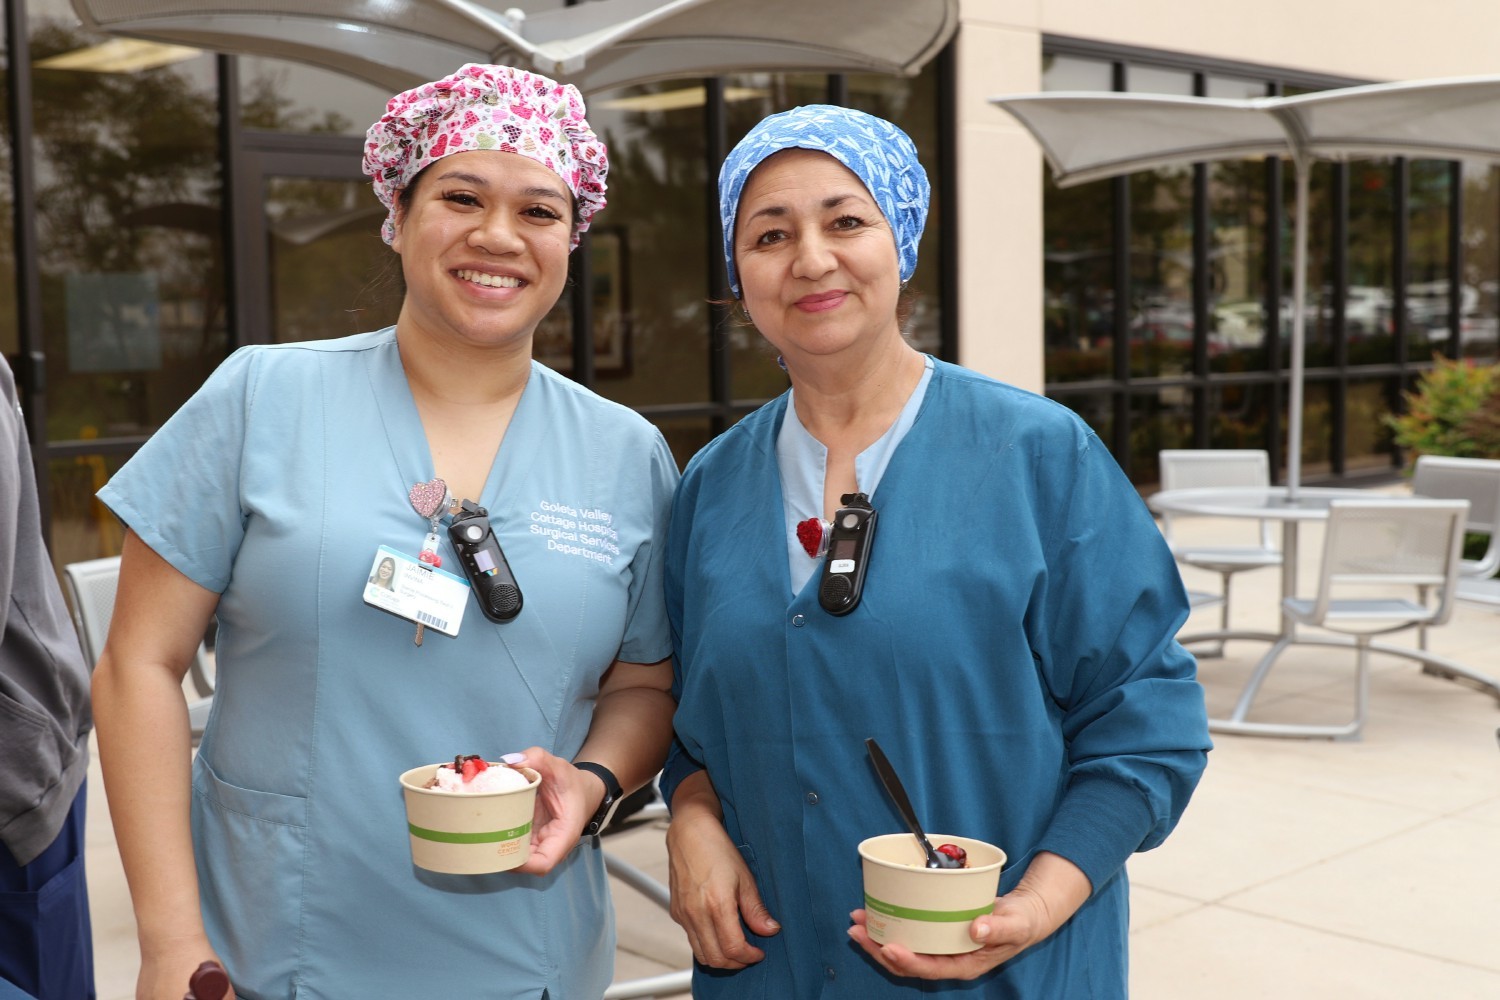 During National Hospital Week, employees enjoy an ice cream social - one of many events to celebrate their great work